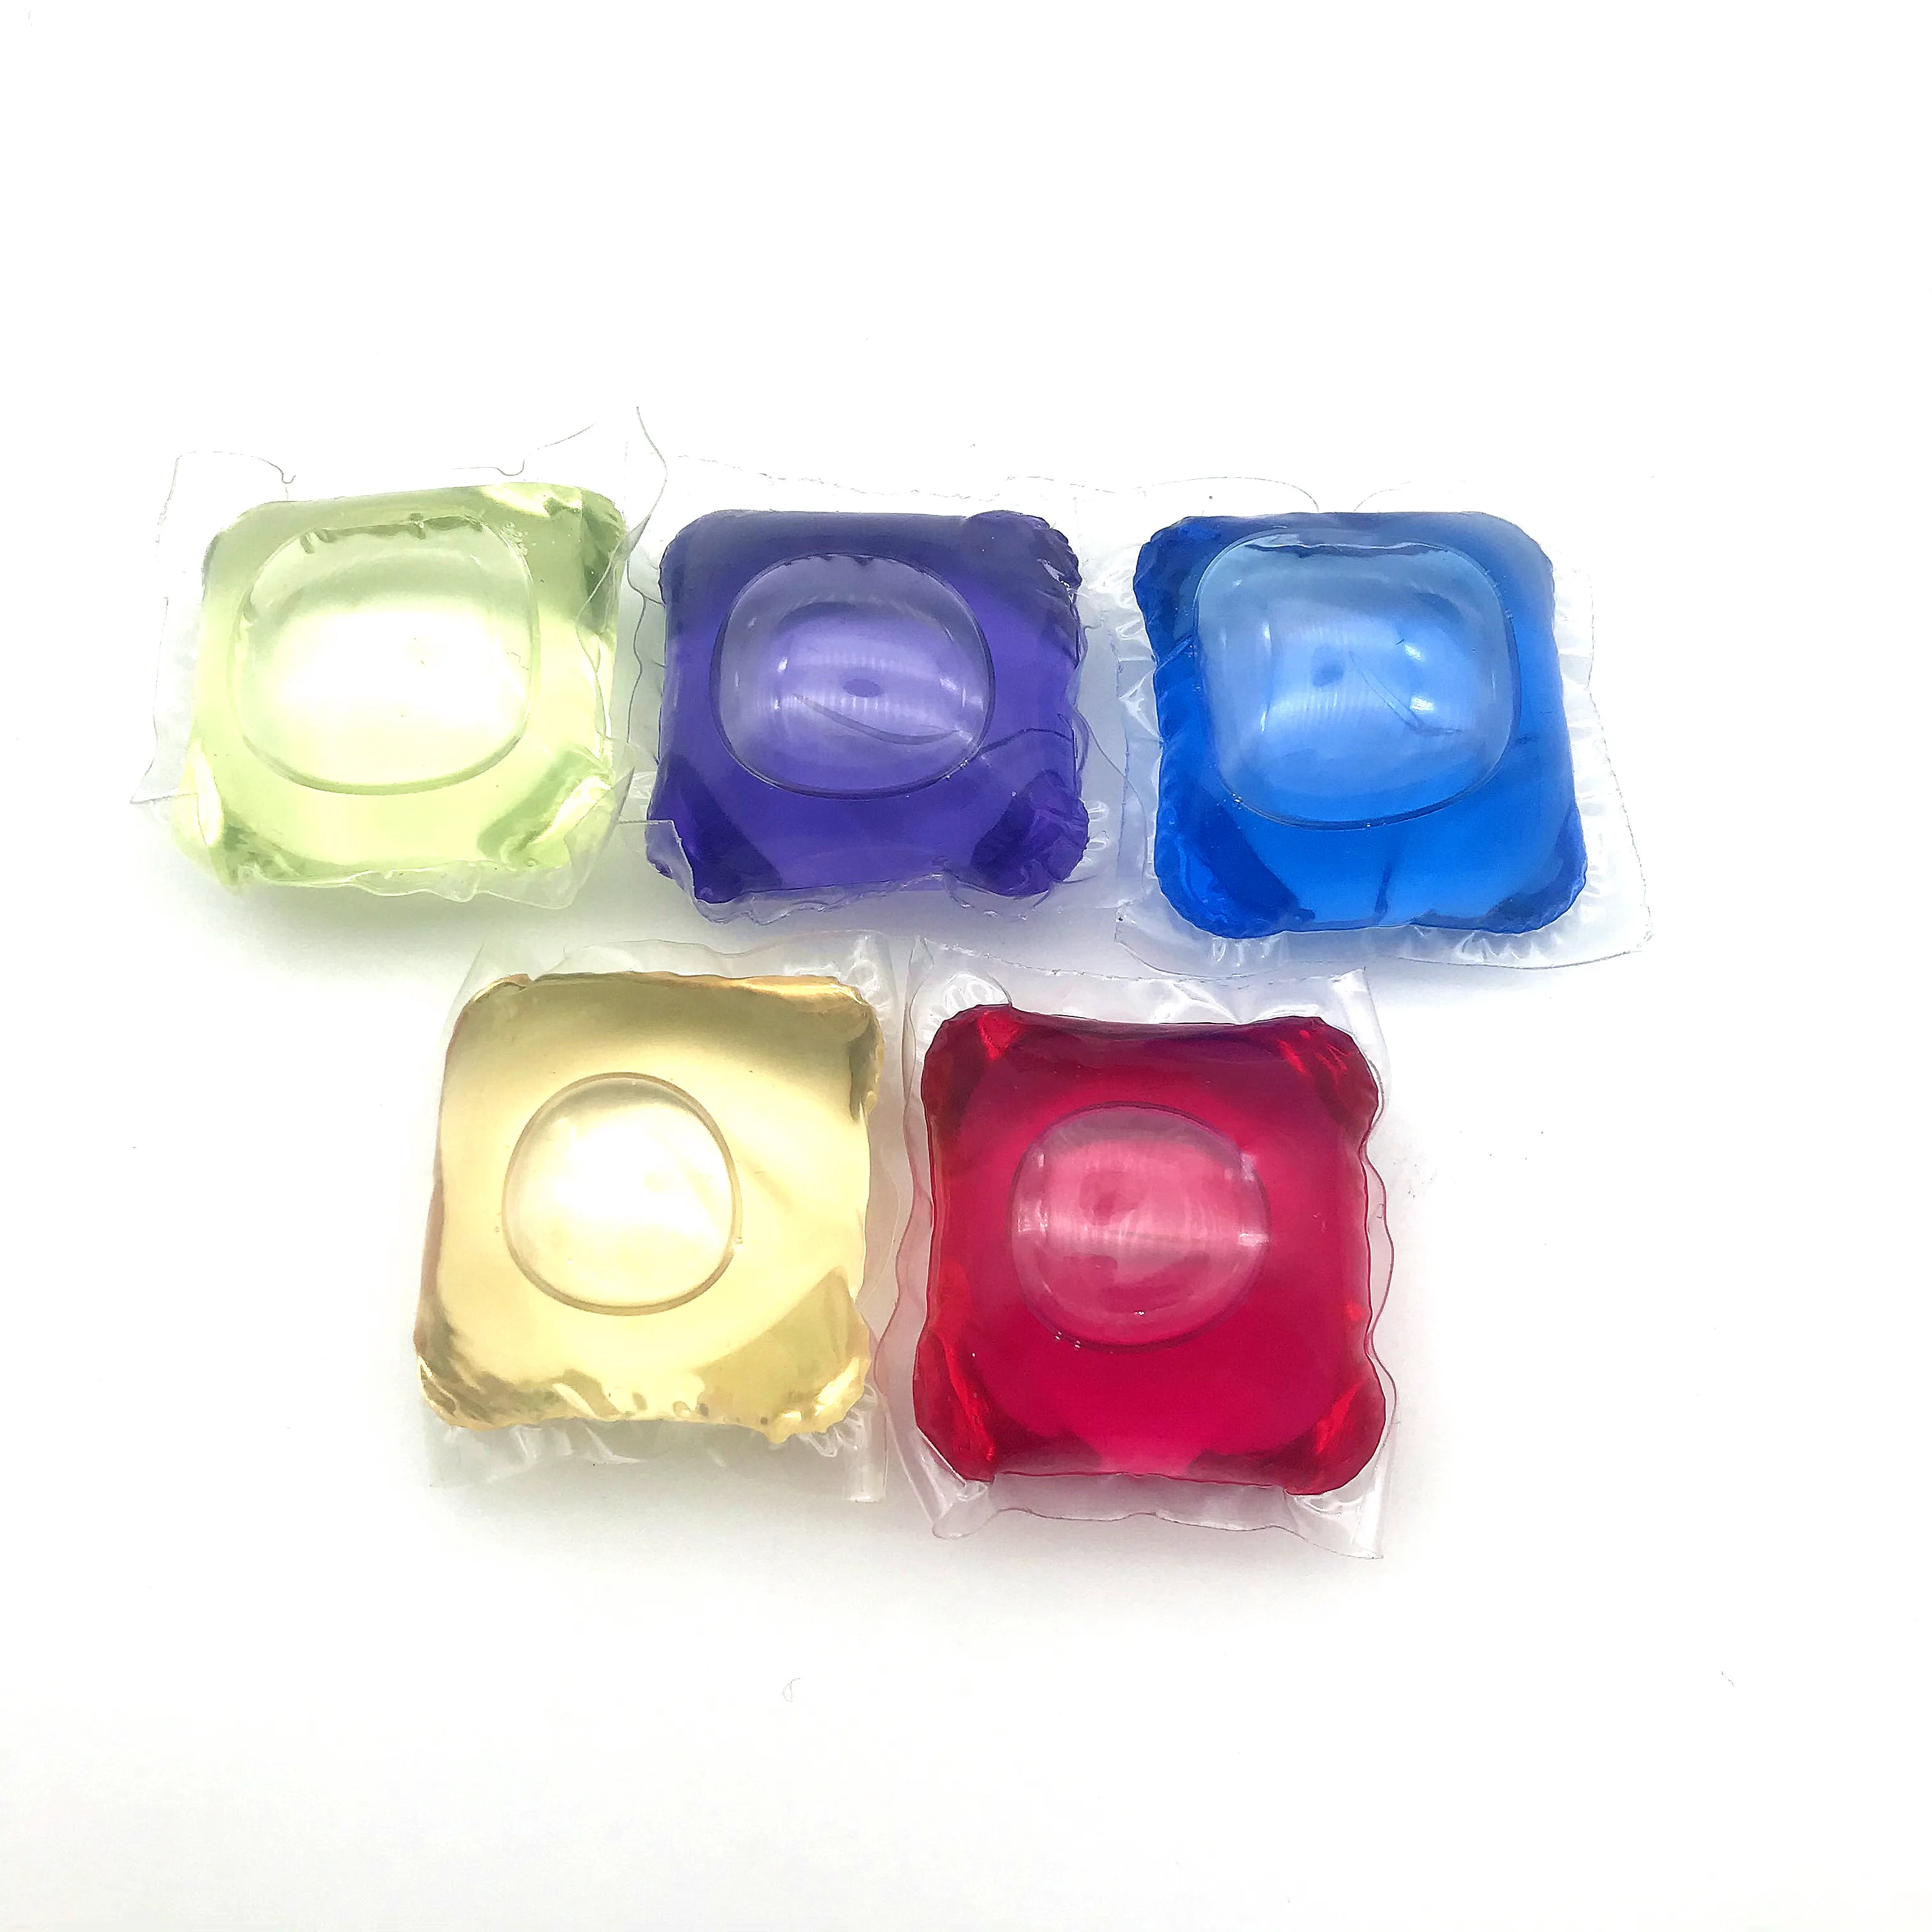 

Laundry Beads in Detergent OEM Cloth Washing Detergent Pods Liquid Laundry Pods Detergent capsules Mature concentrated formula